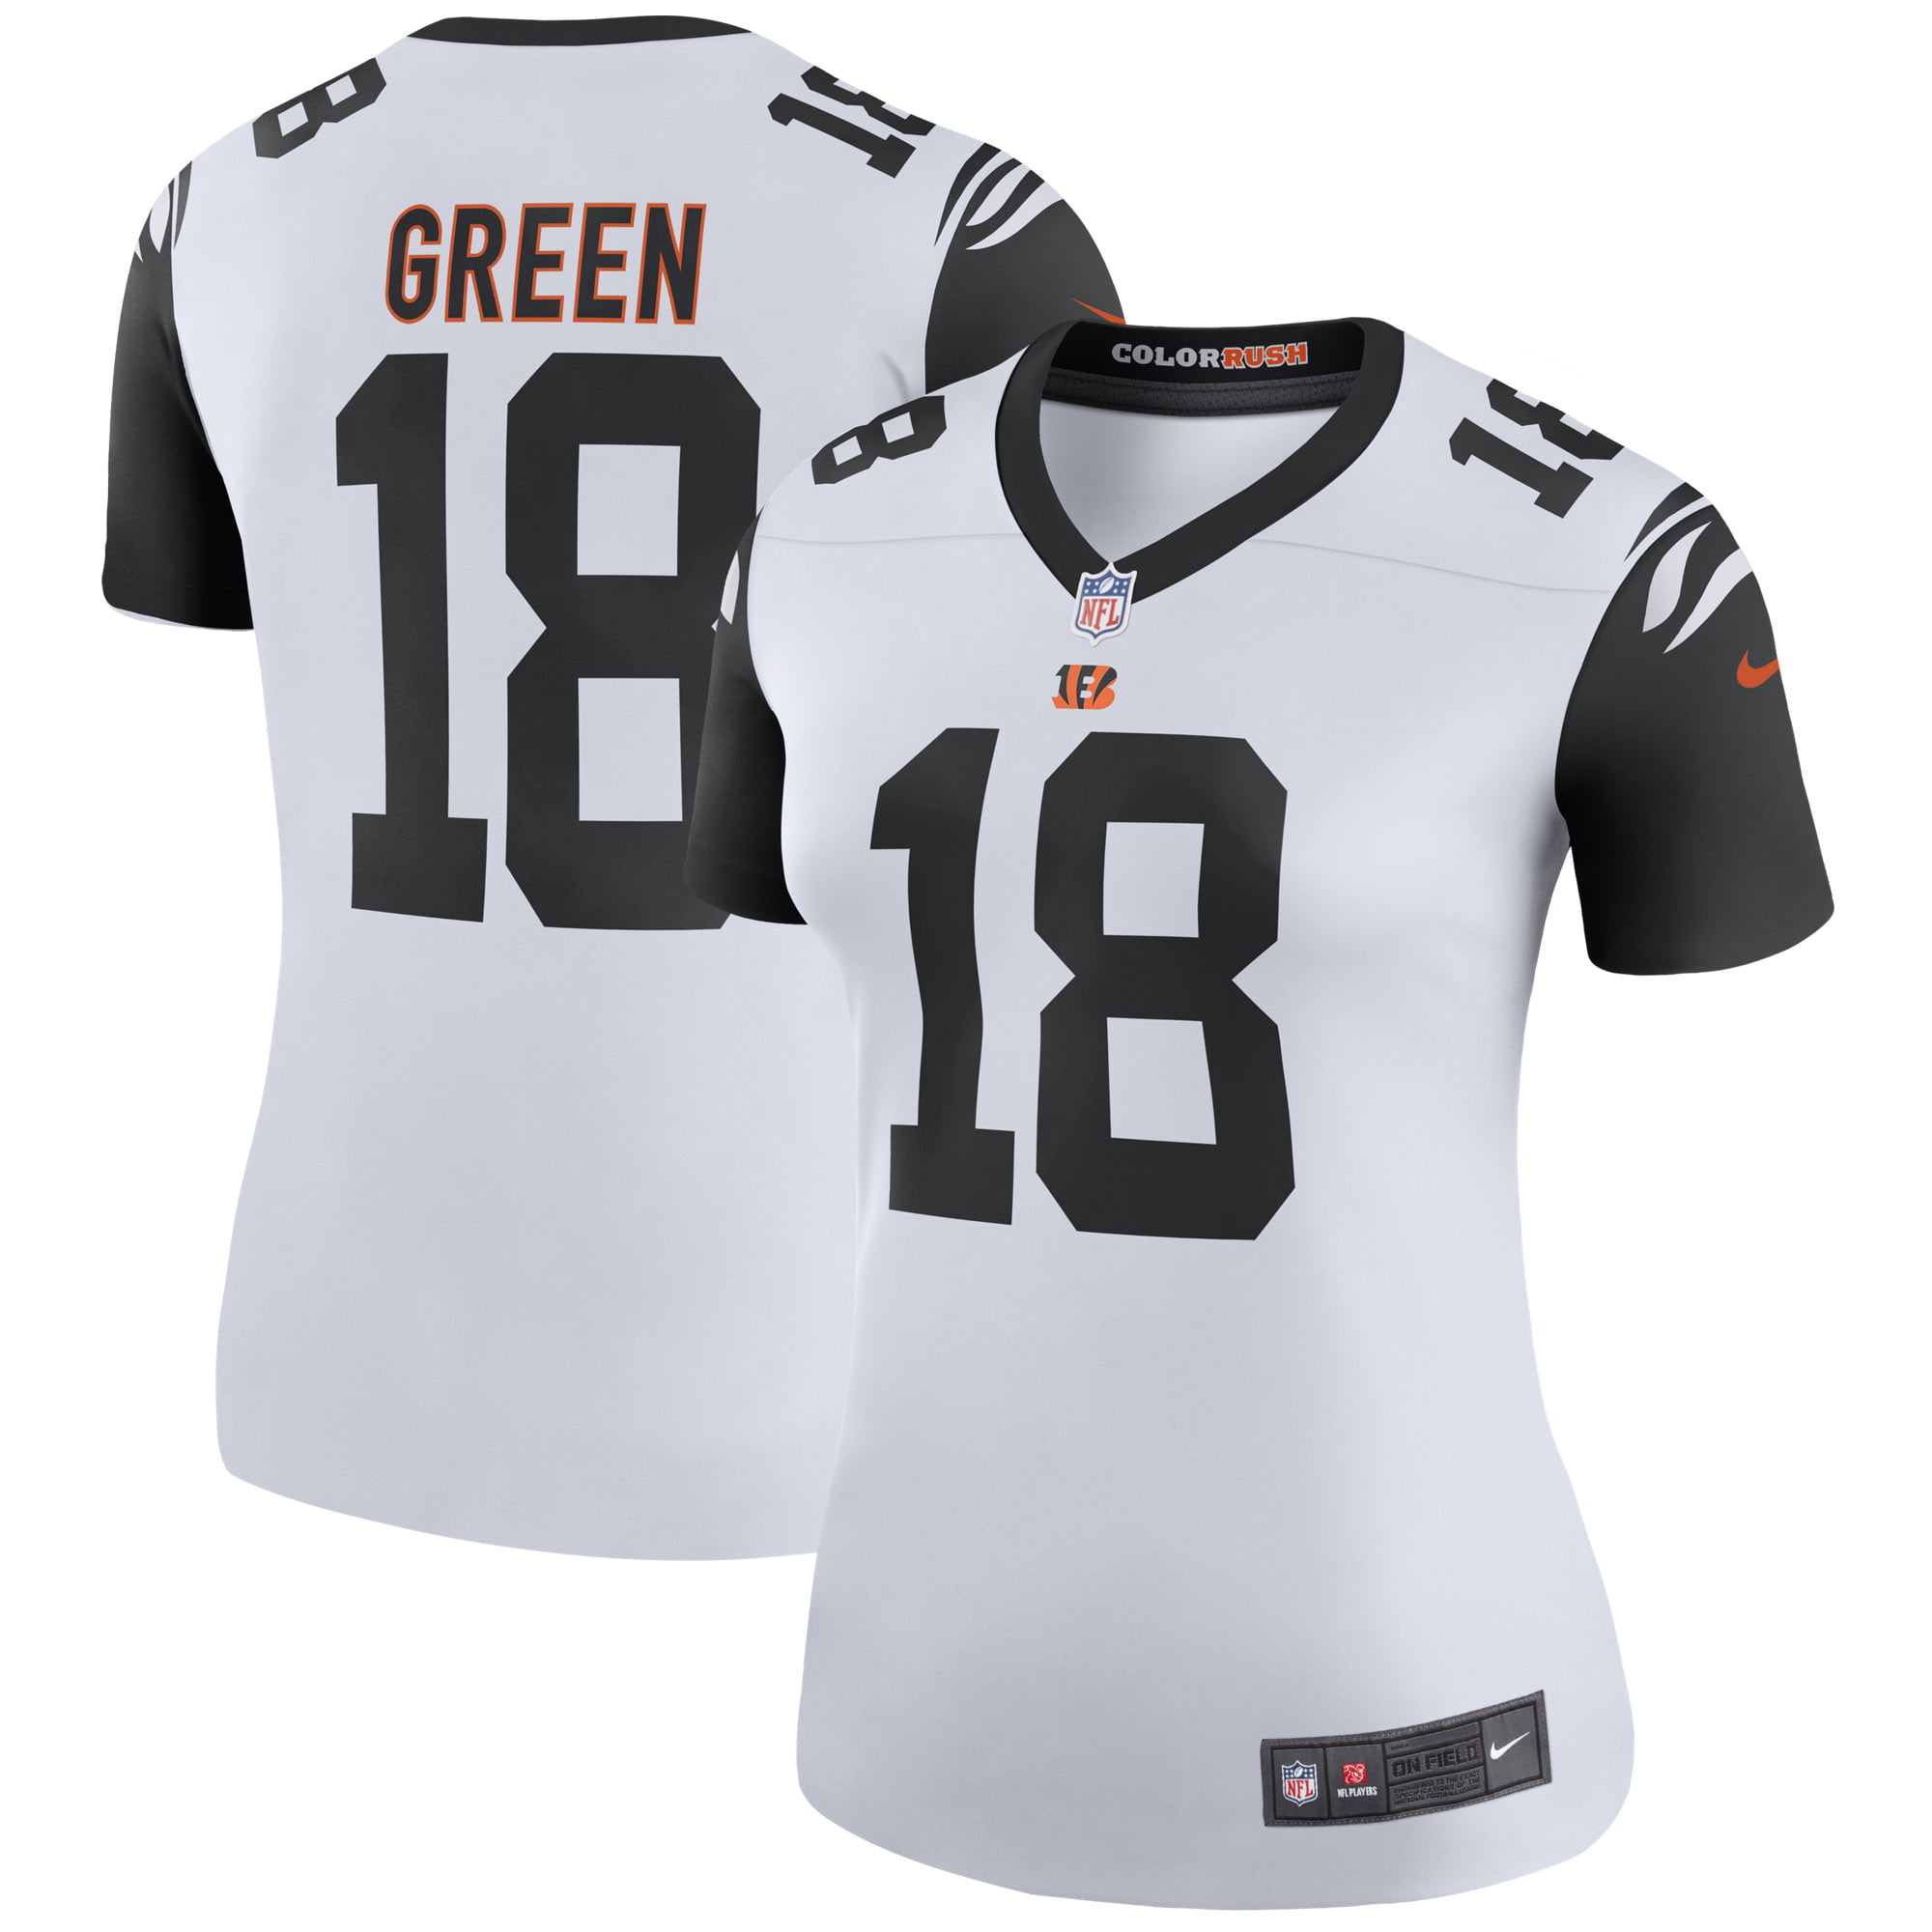 bengals color rush jersey sale